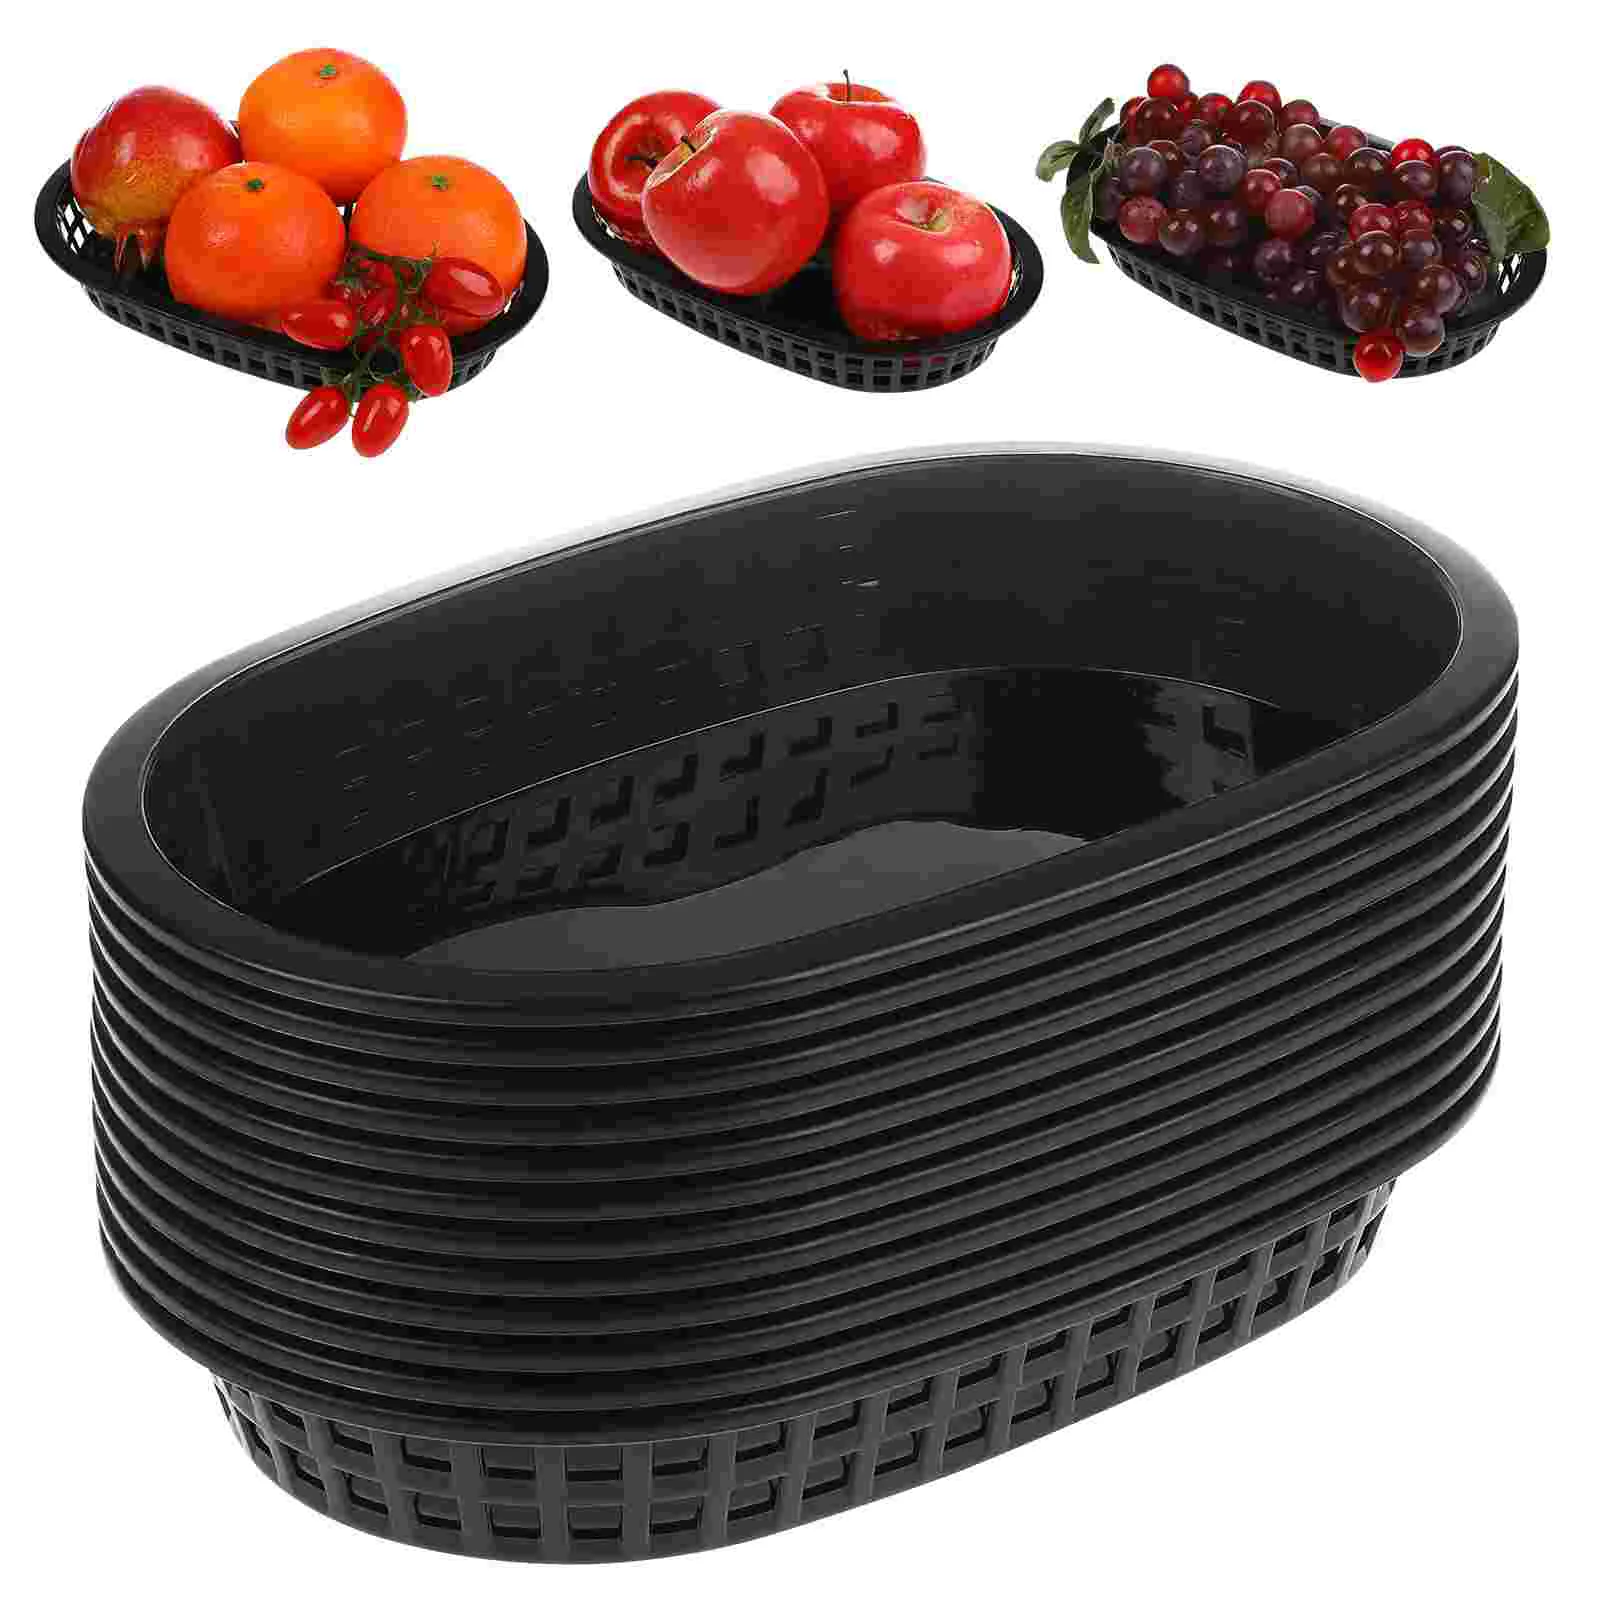 

Baskets Basket Serving Fast Bread Trays Fruit Oval Kitchen Restaurant Hot Dog Tray Container Cupcake Black Party Service Shaped